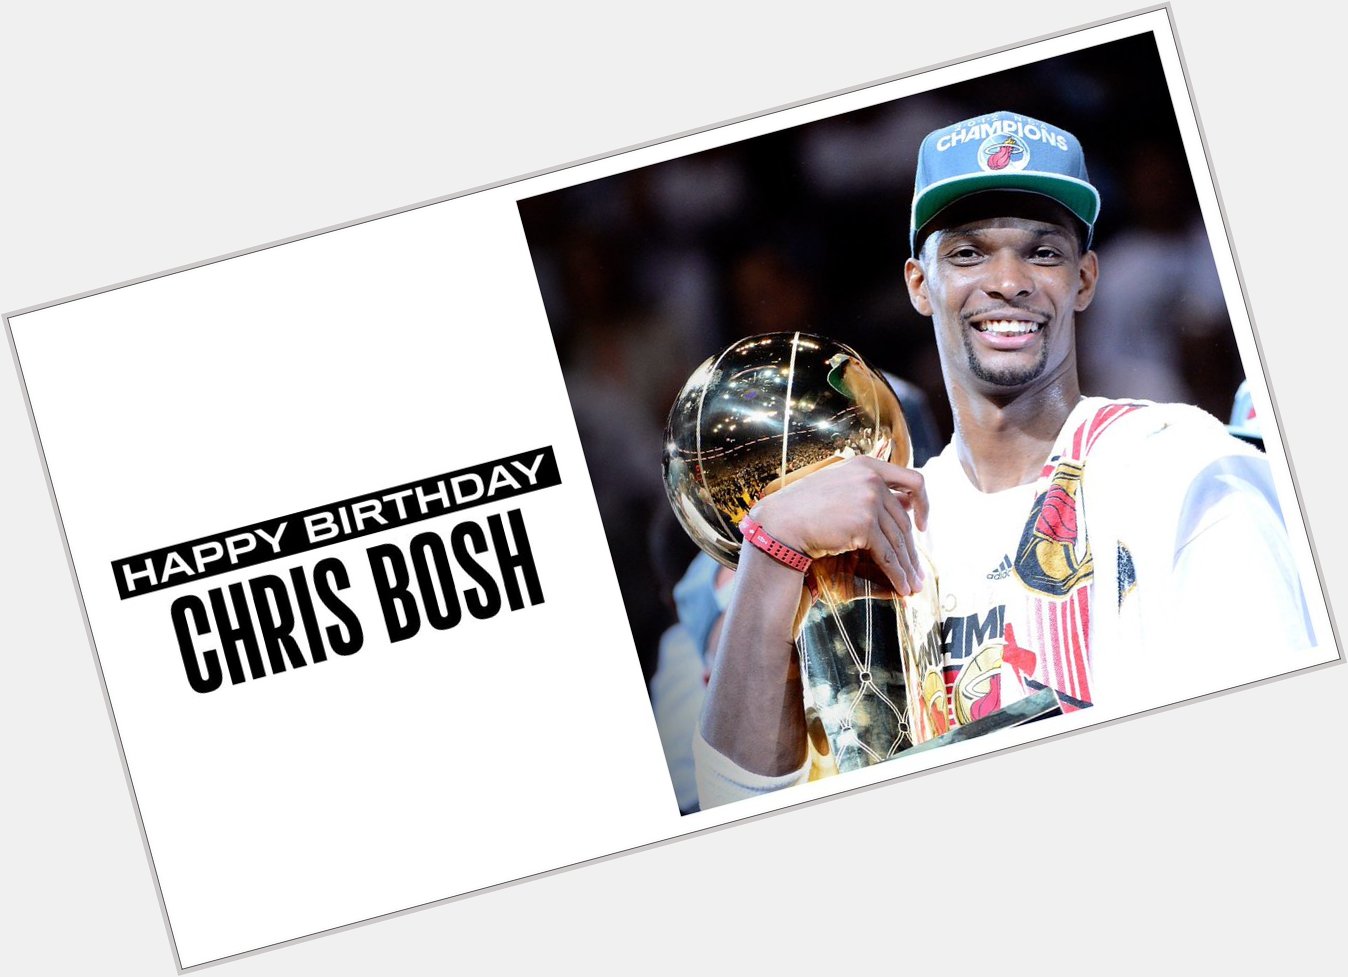 Join us in wishing a Happy 37th Birthday to 11x and 2x NBA champion, Chris Bosh! 